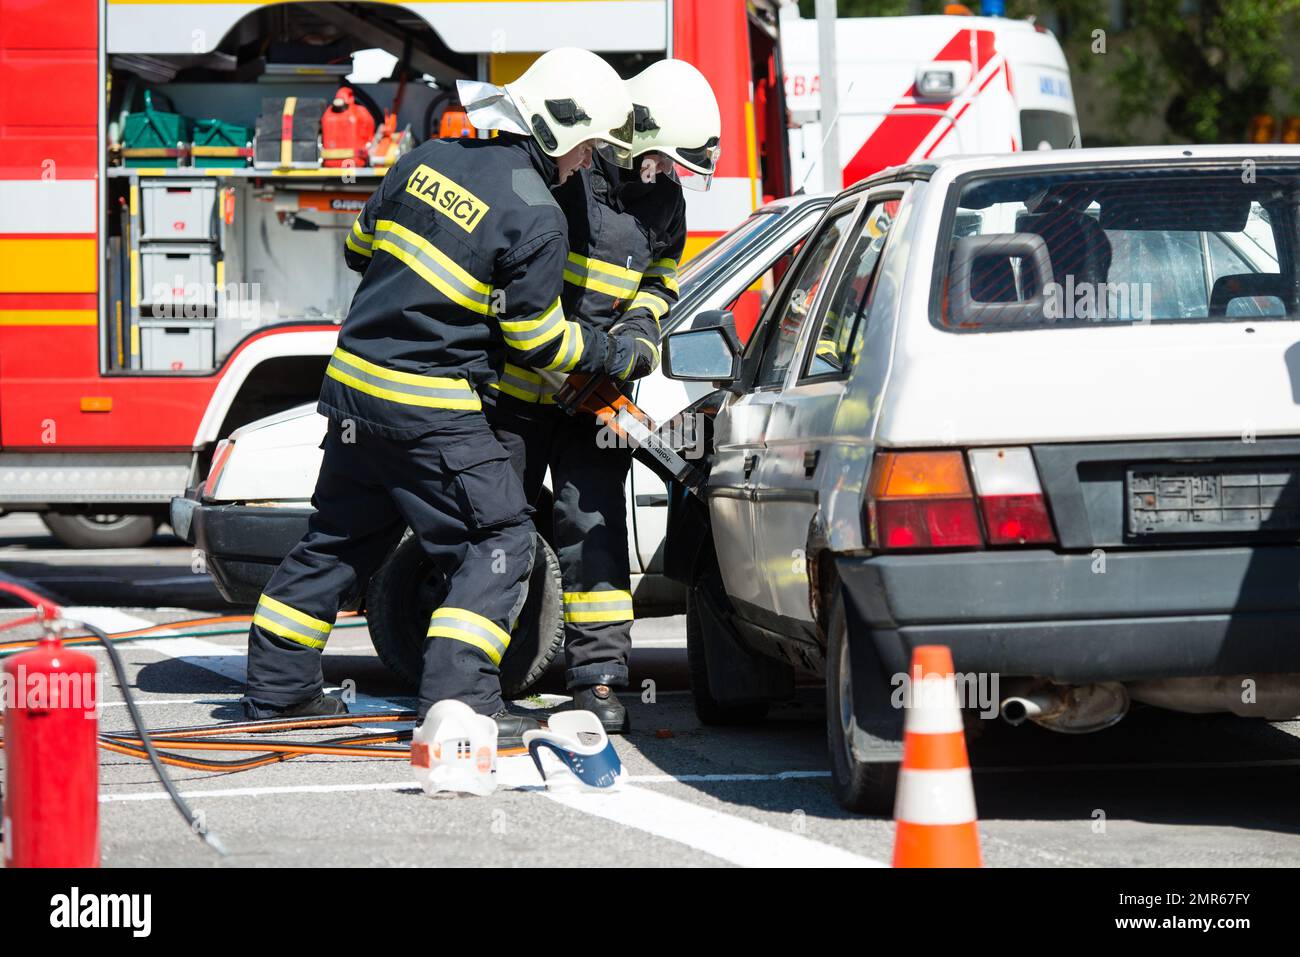 PEZINOK, SLOVAKIA - MAY 4, 2014: Search and rescue operation during simulated car accident in Pezinok, Slovakia Stock Photo